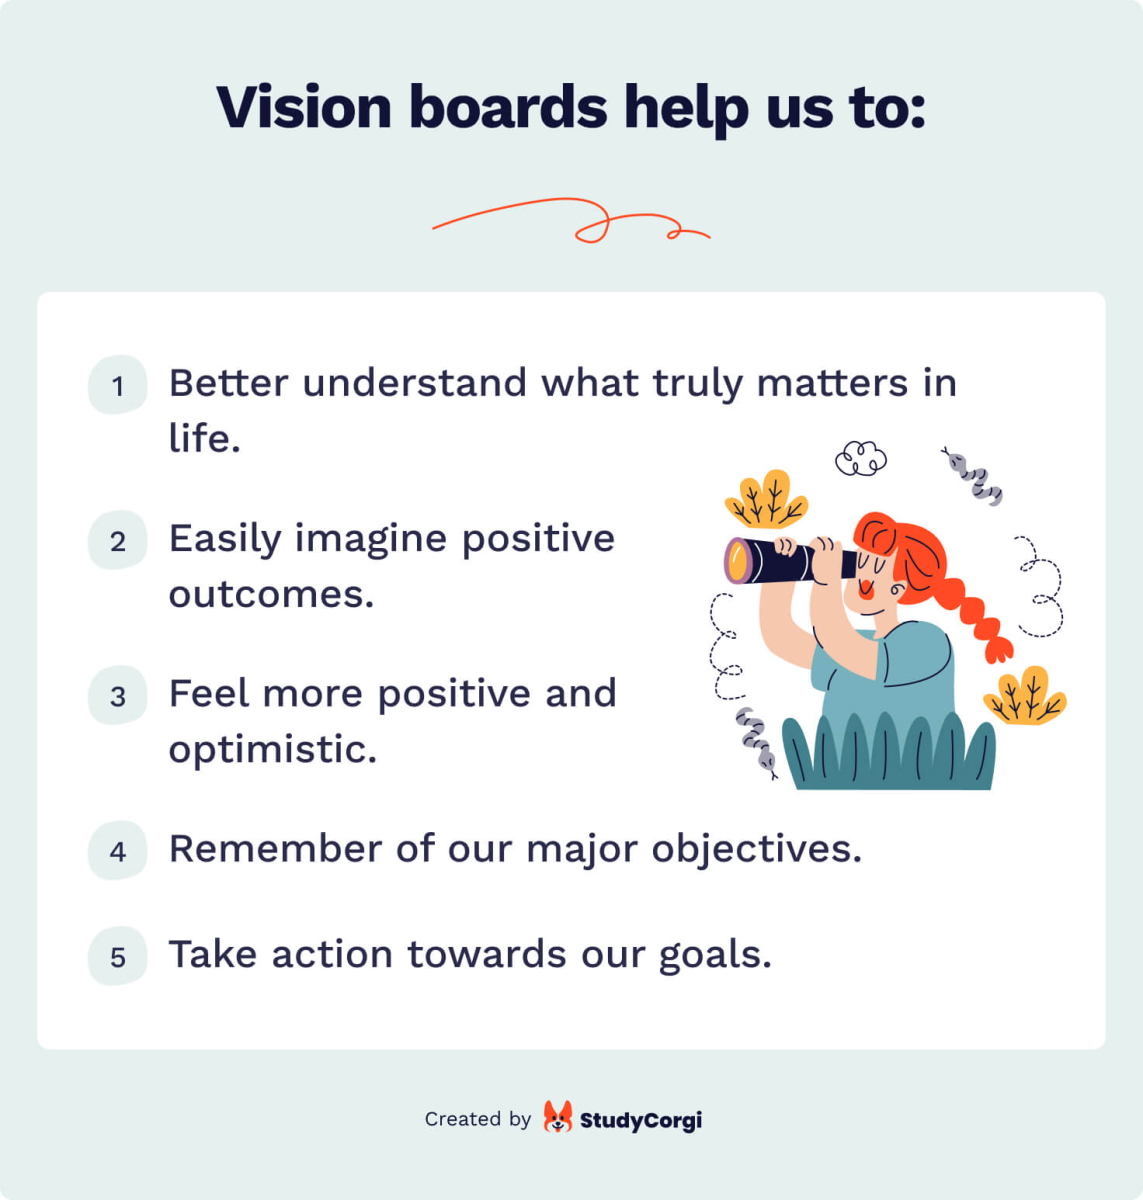 The picture lists the key benefits that a student vision board can bring.